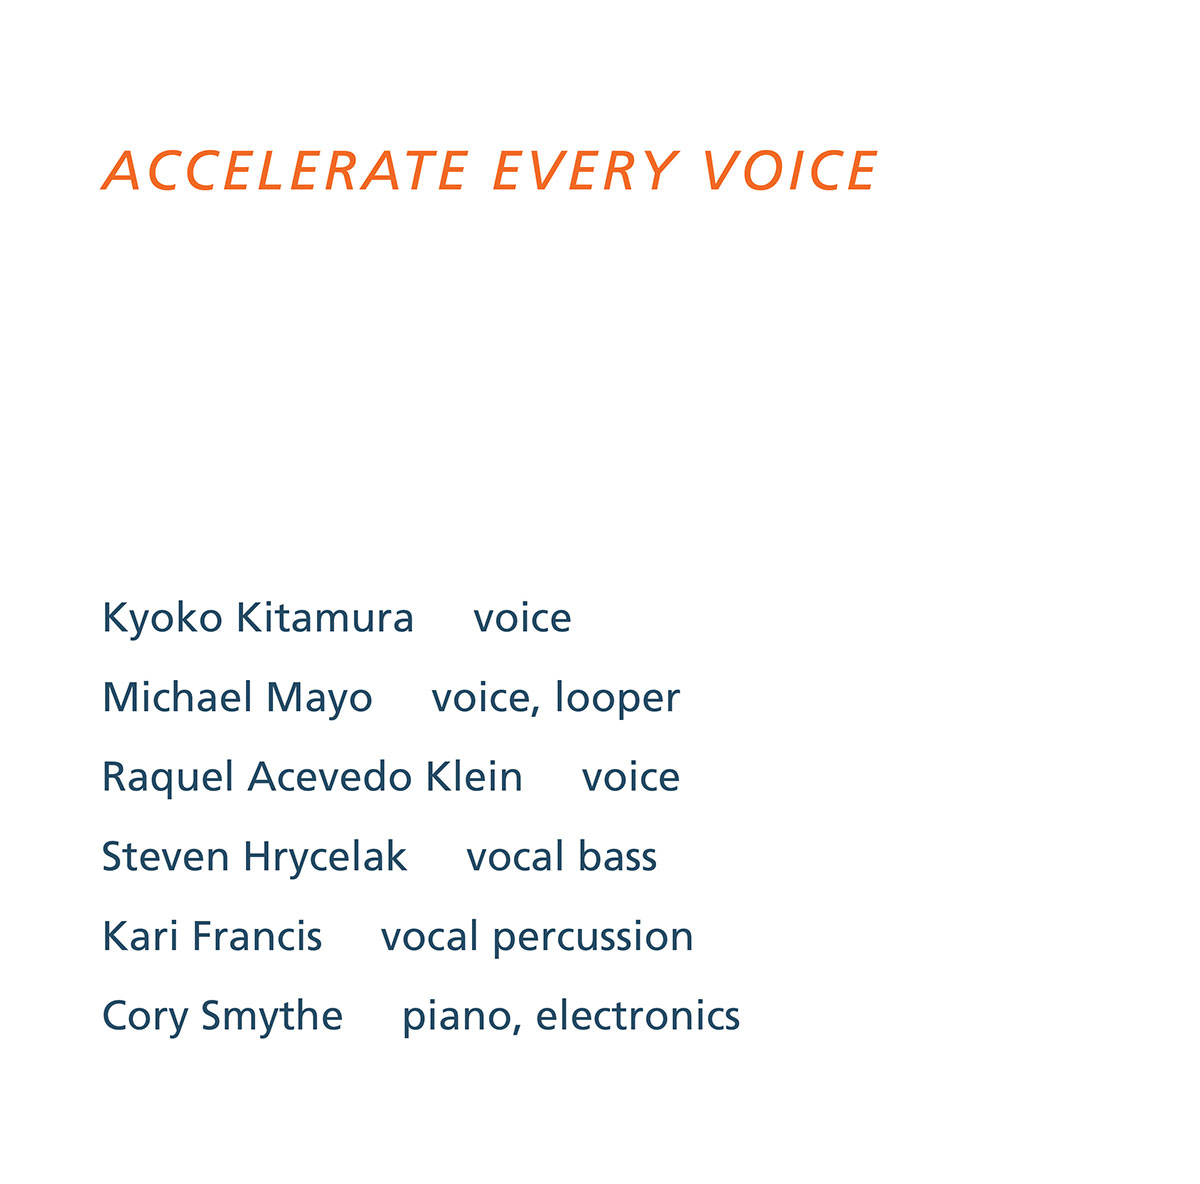 ACCELERATE EVERY VOICE